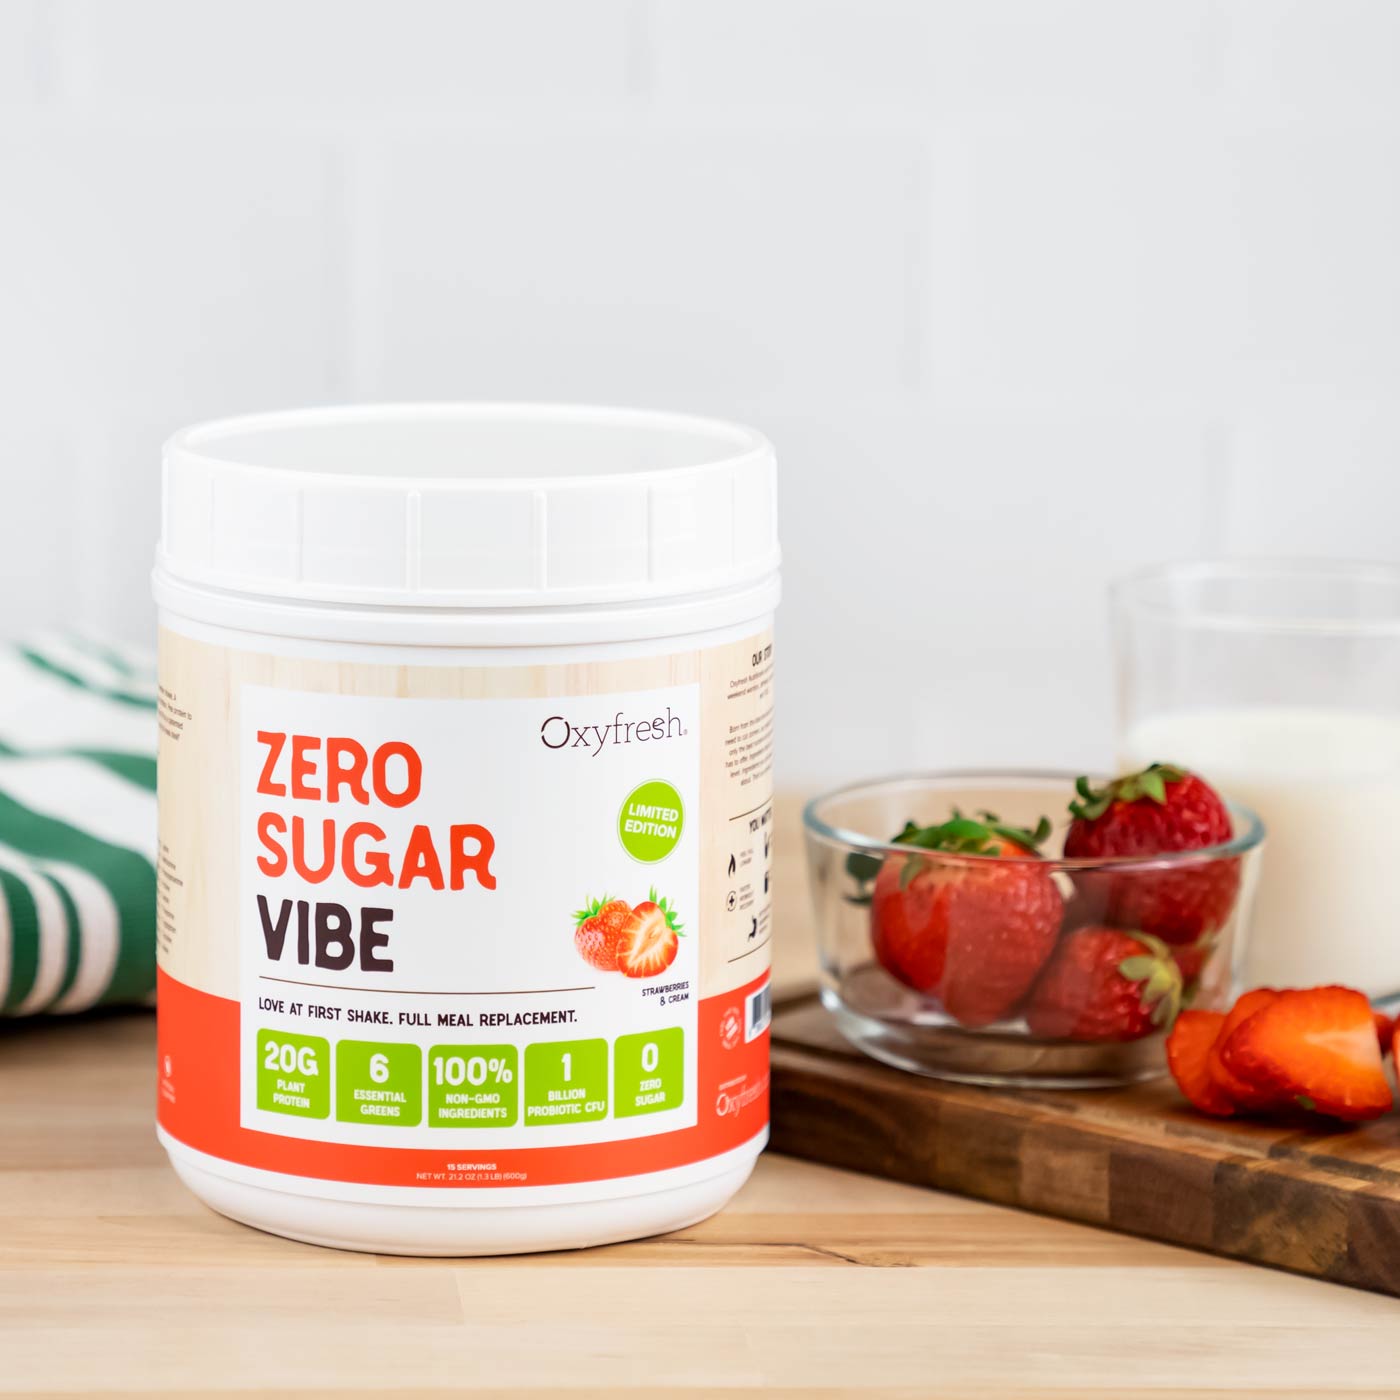 oxyfresh-vibe-zero-sugar-strawberry-protein-powder-on-the-countertop-next-to-glass-of-ice-cold-milk-and-fresh-strawaberries-on-cutting-board